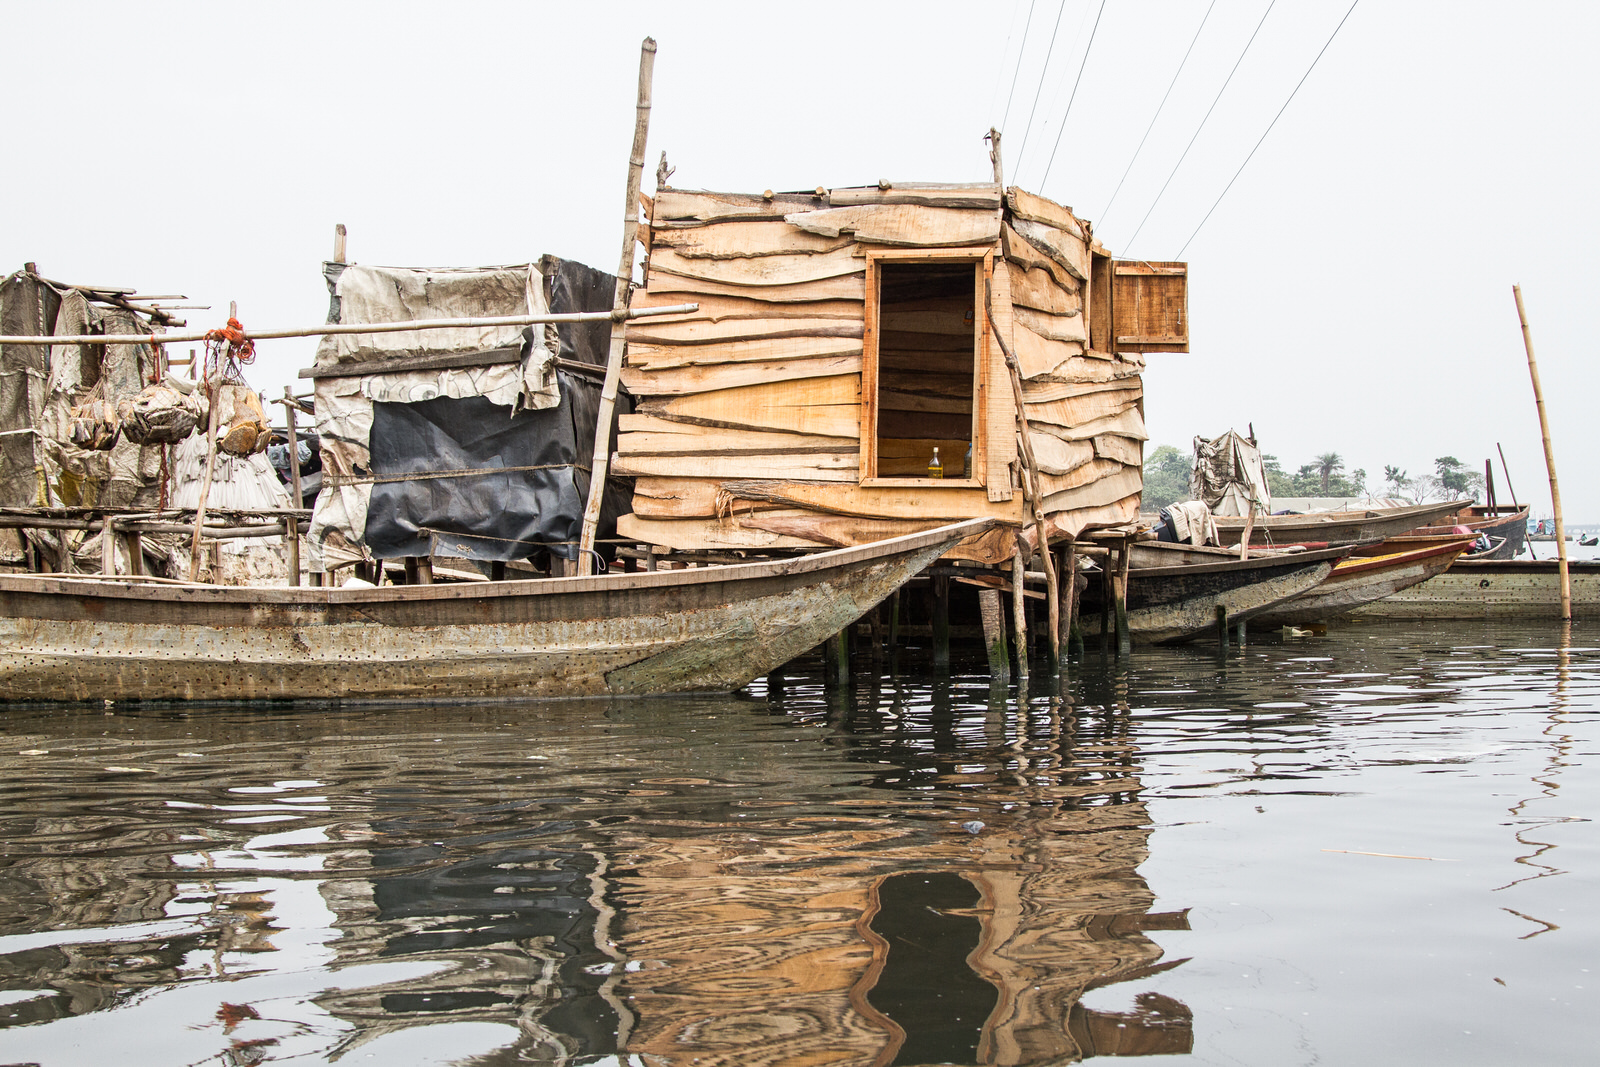  With limited space on land, the community has built onto the water. Following the mass evictions of another waterfront community, Otodo Gbame, the population of Sogunro swelled as many evictees were accommodated. 